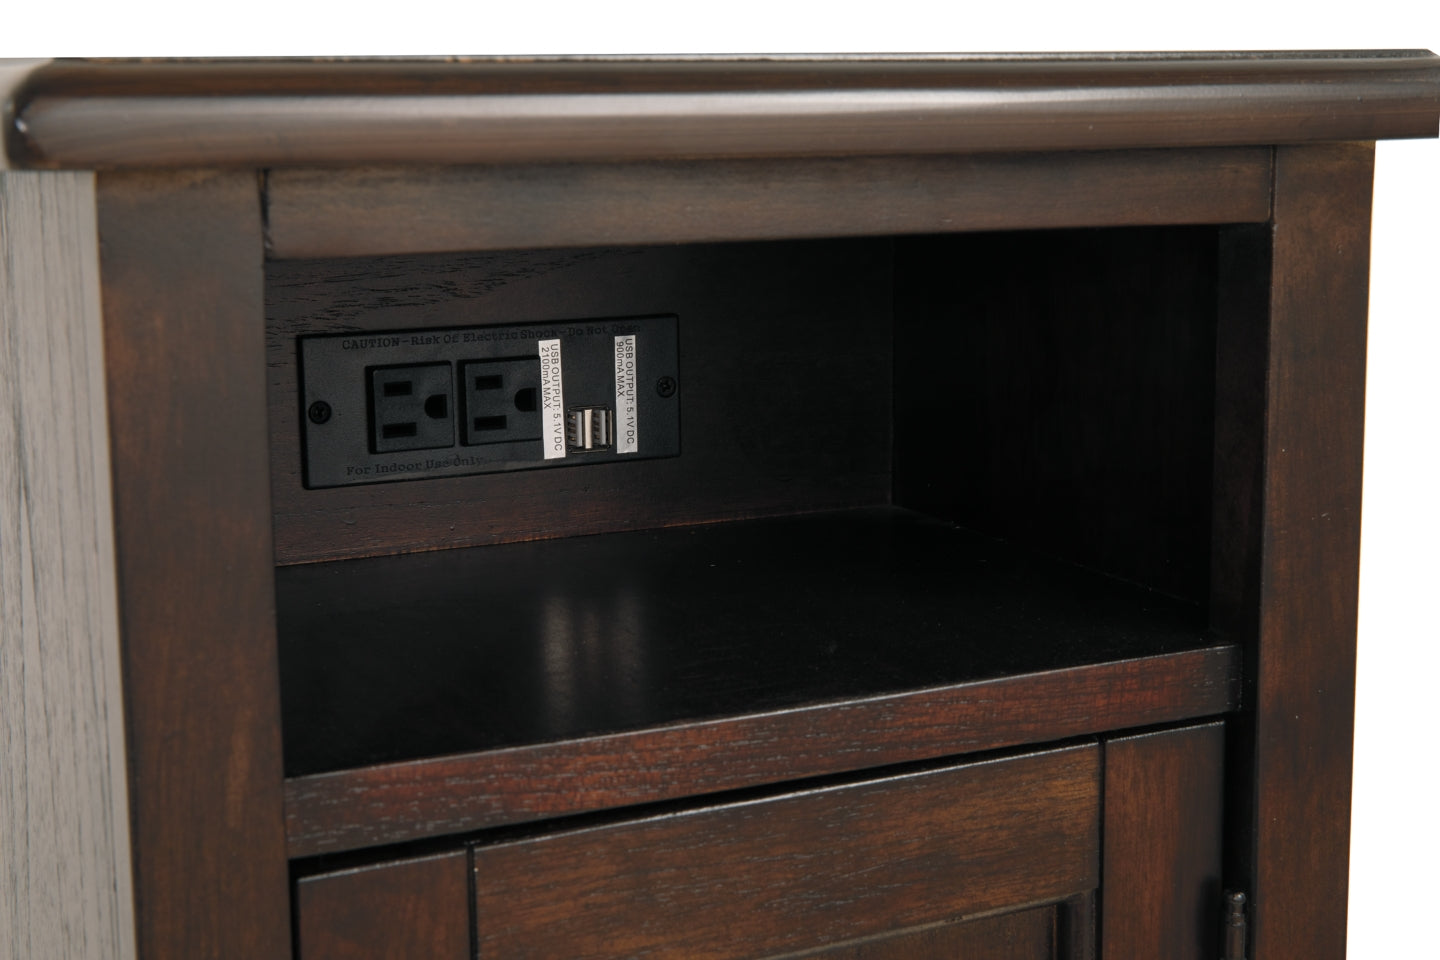 Barilanni Chairside End Table with USB Ports & Outlets - The Bargain Furniture